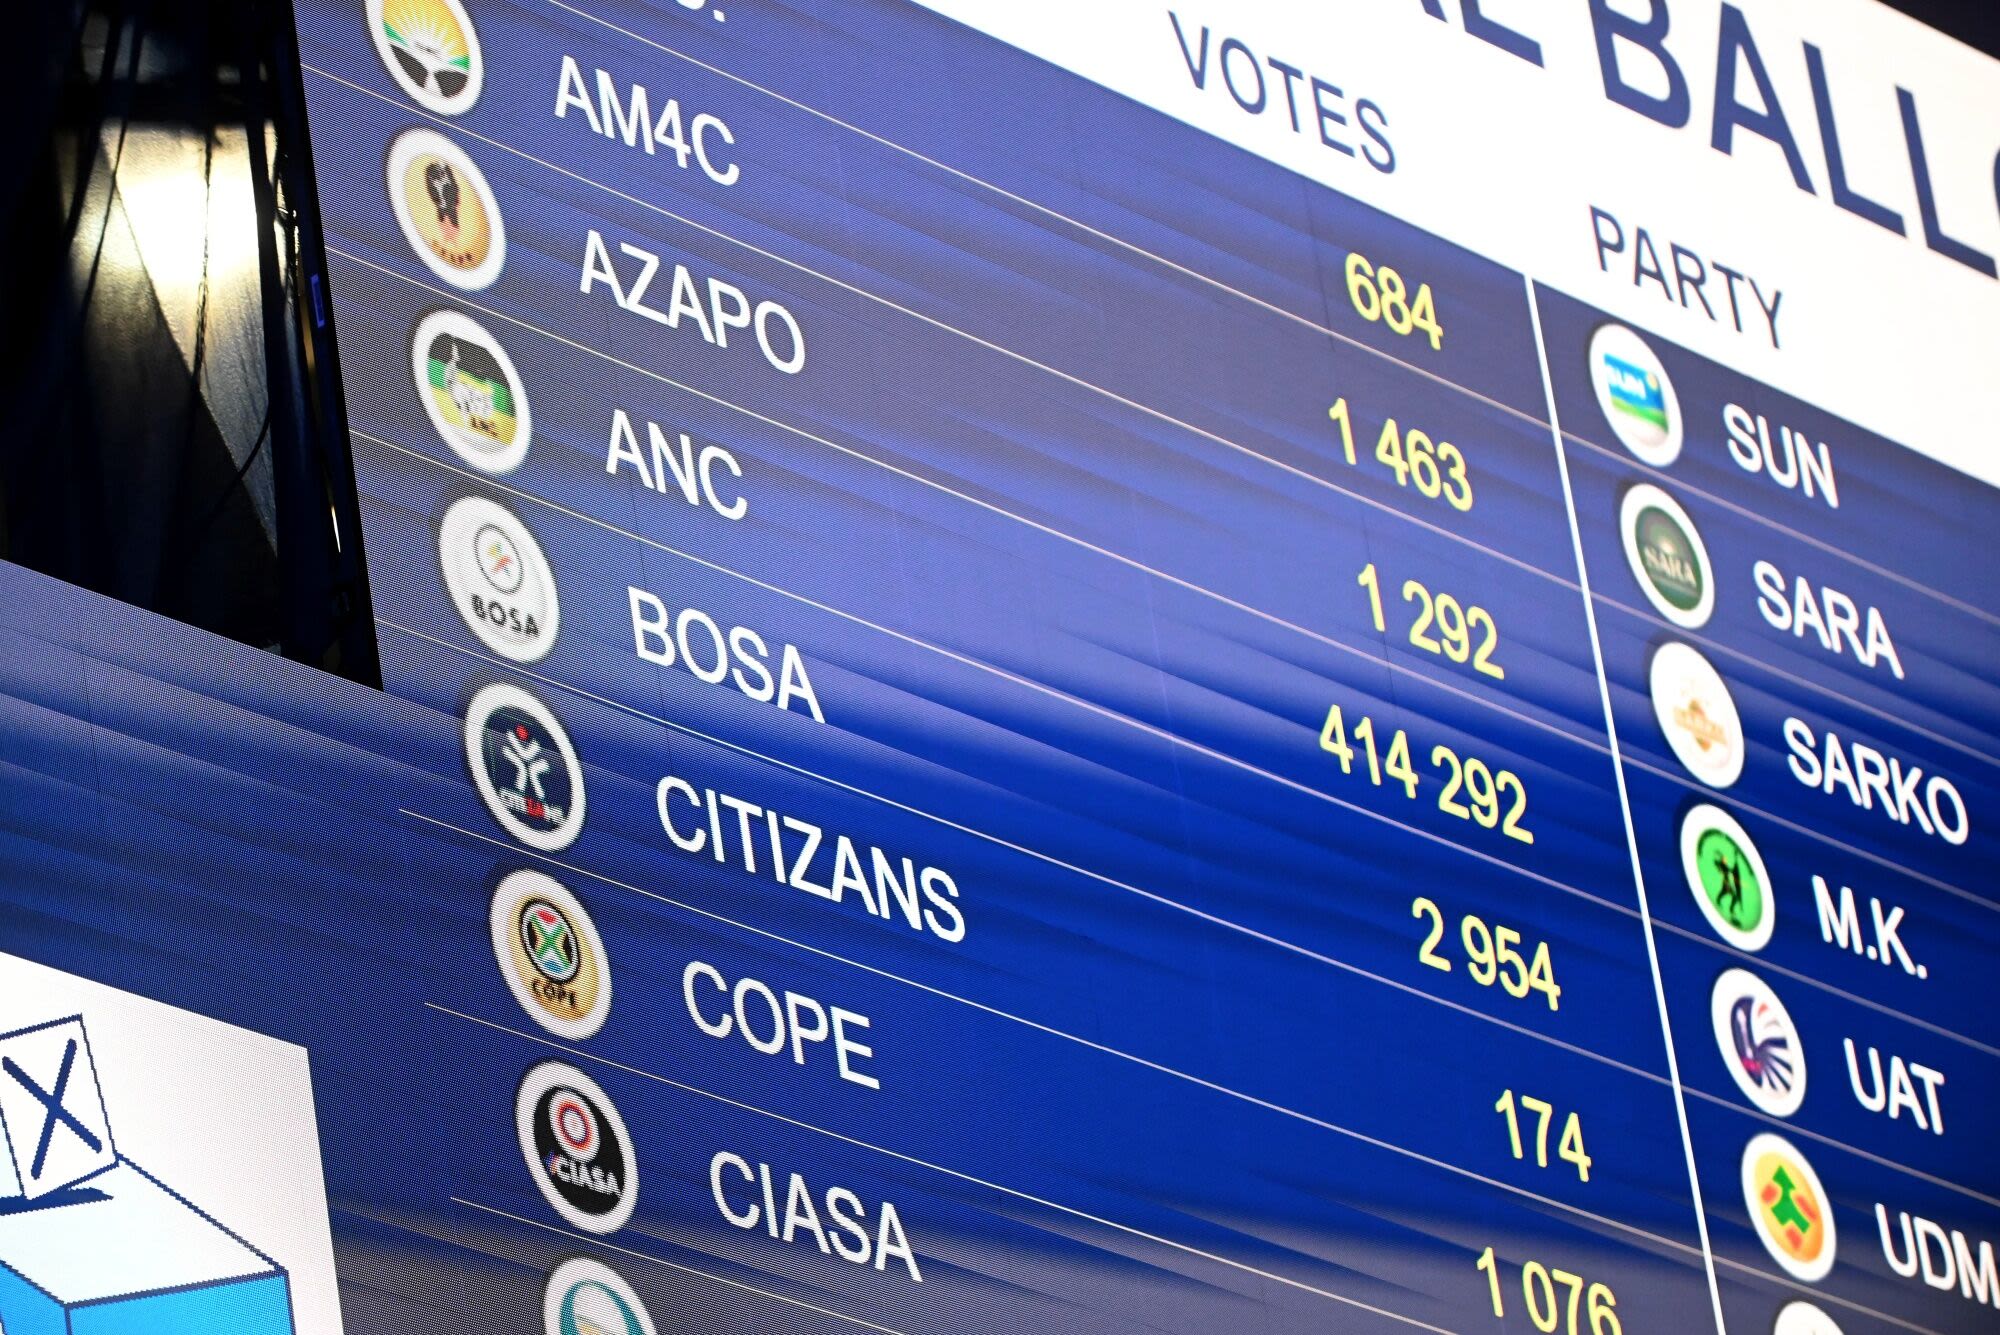 Here Are the Latest Verified Results From South Africa’s Election